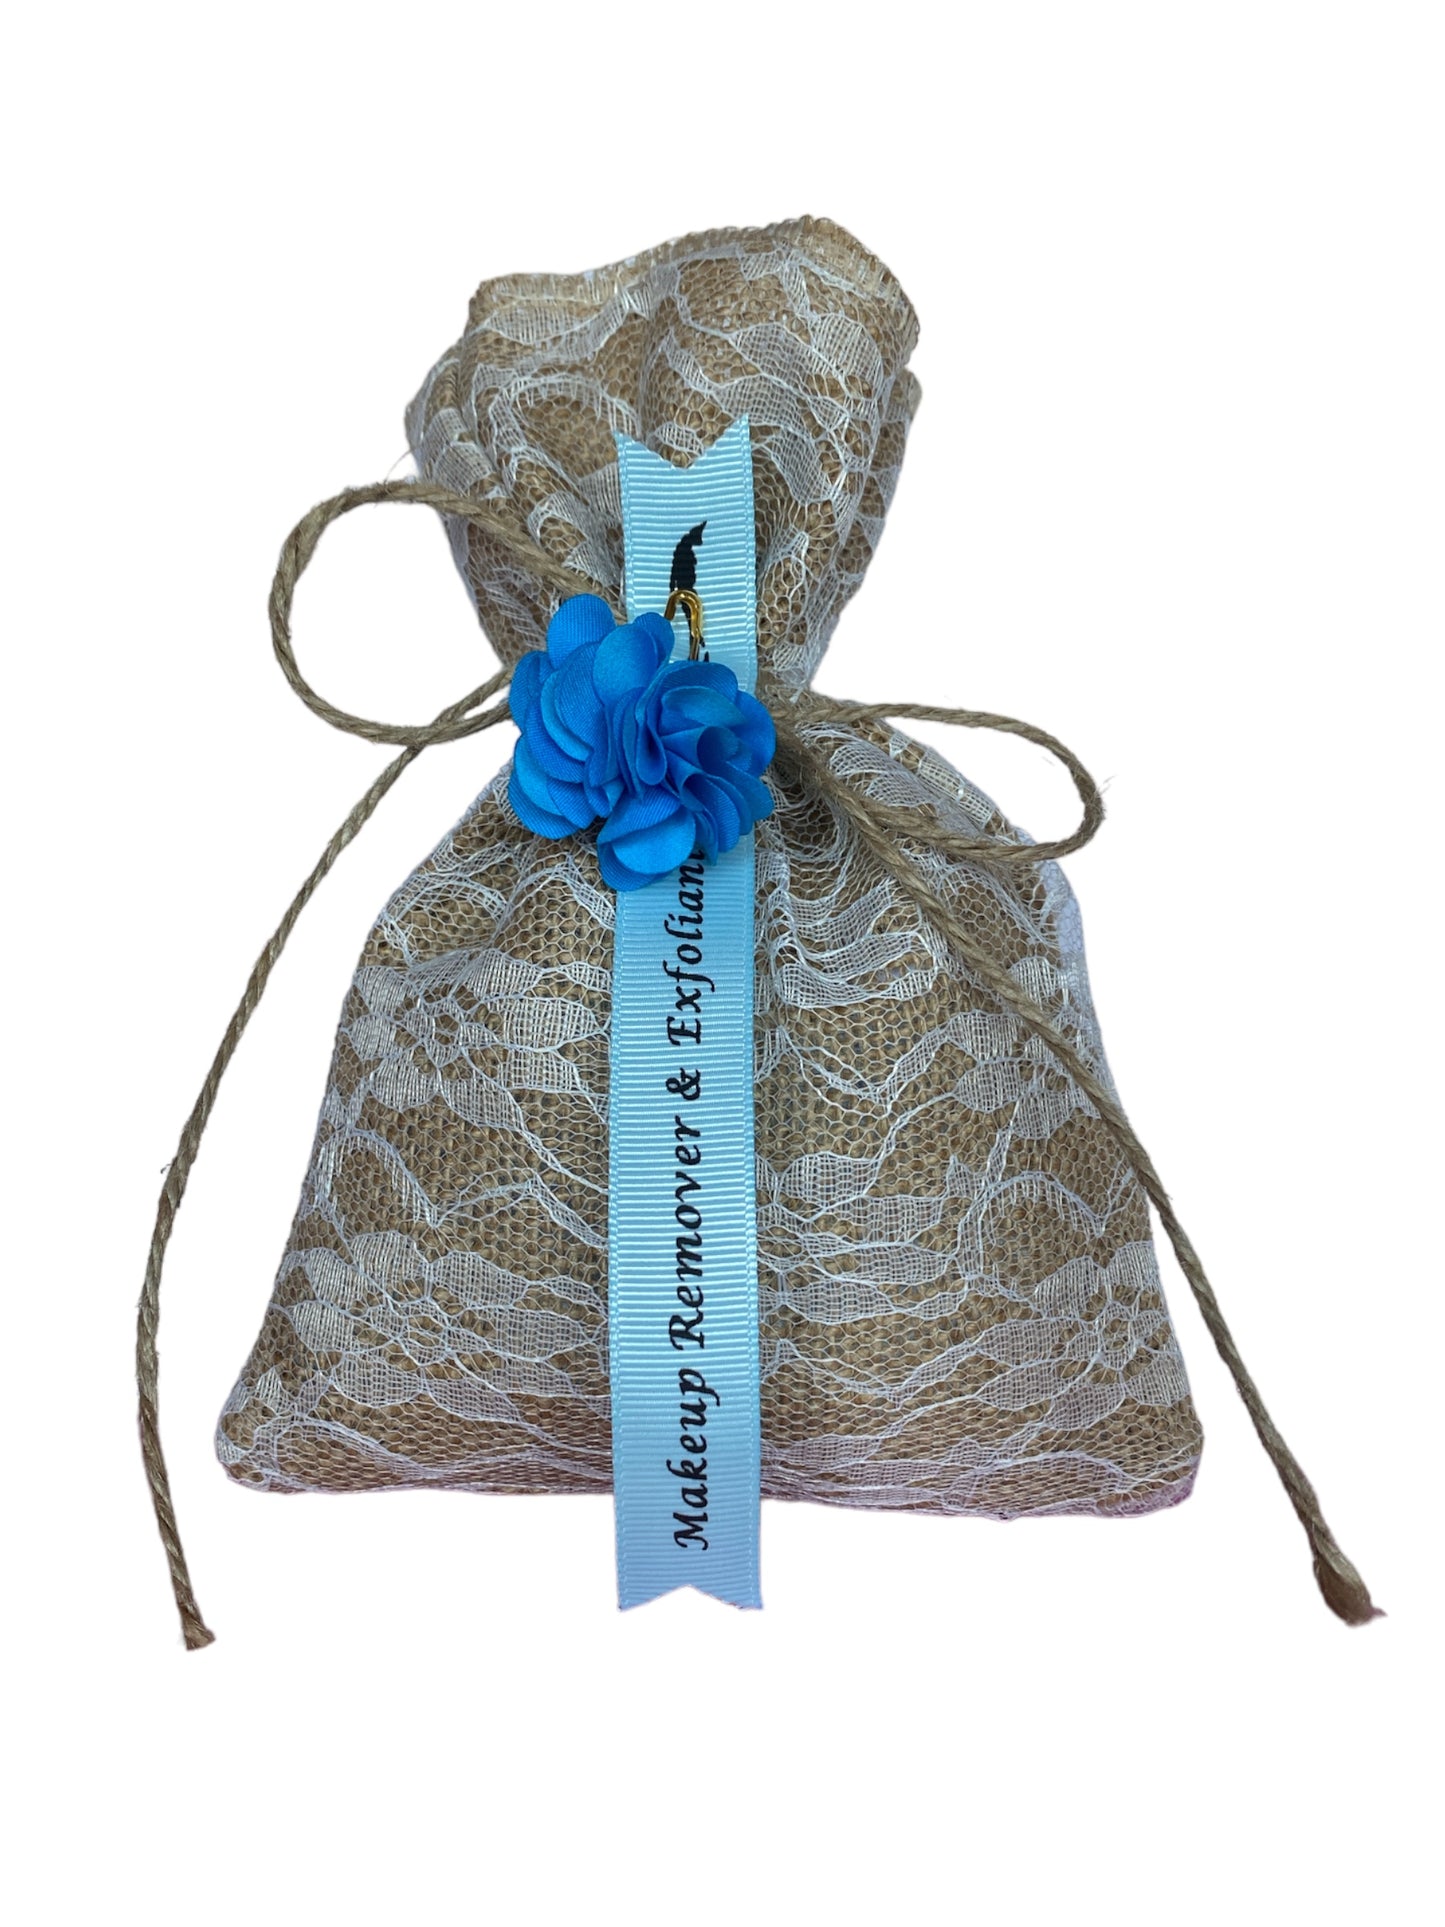 SMALL WASHDOLLY BURLAP LACE BLUE